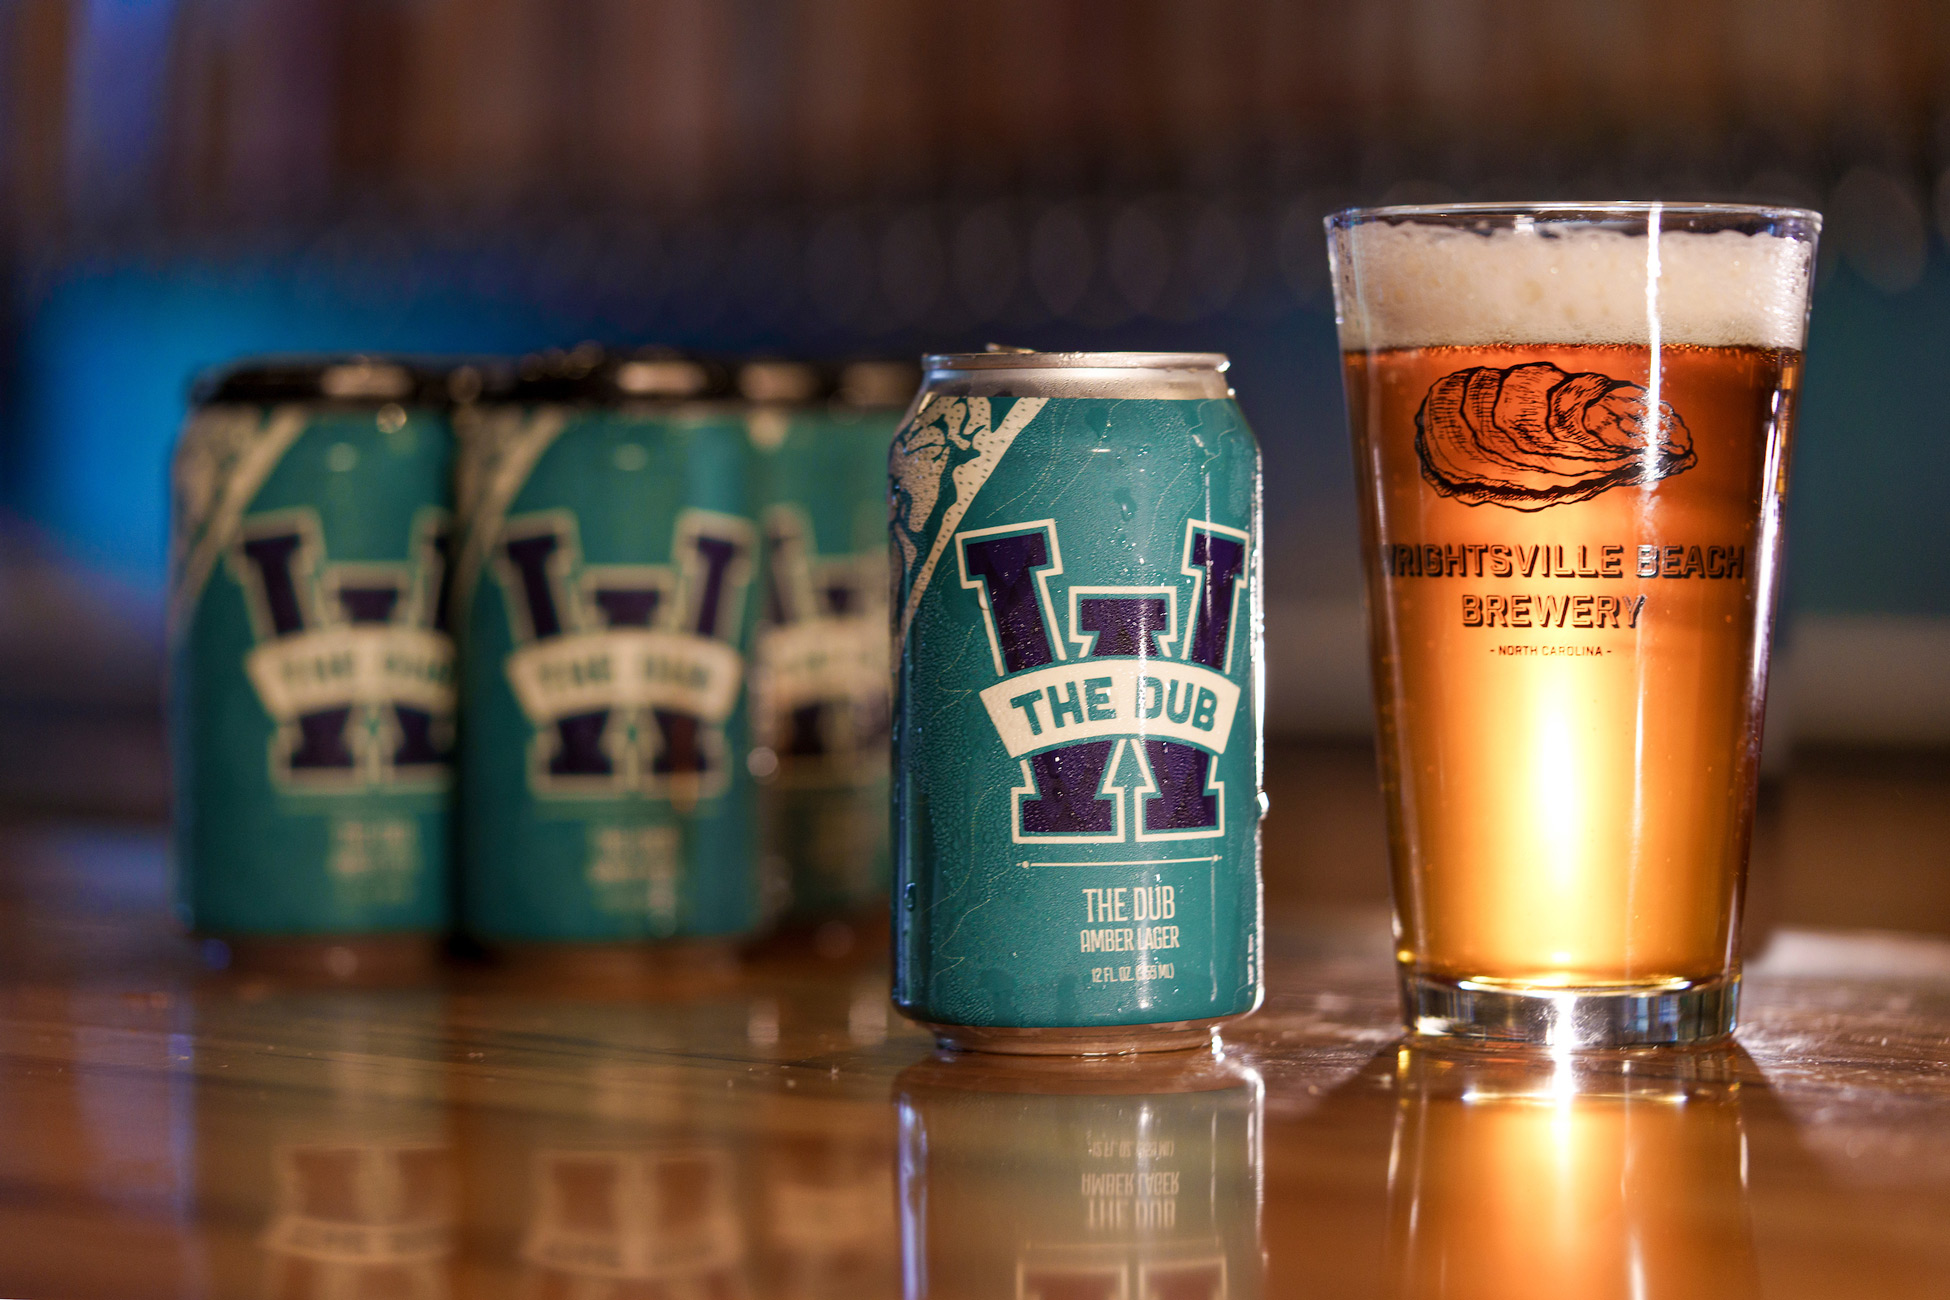 UNC Wilmington and Wrightsville Beach Brewery have partnered to license an official craft beer befitting of Seahawk Nation called The Dub Amber Lager.